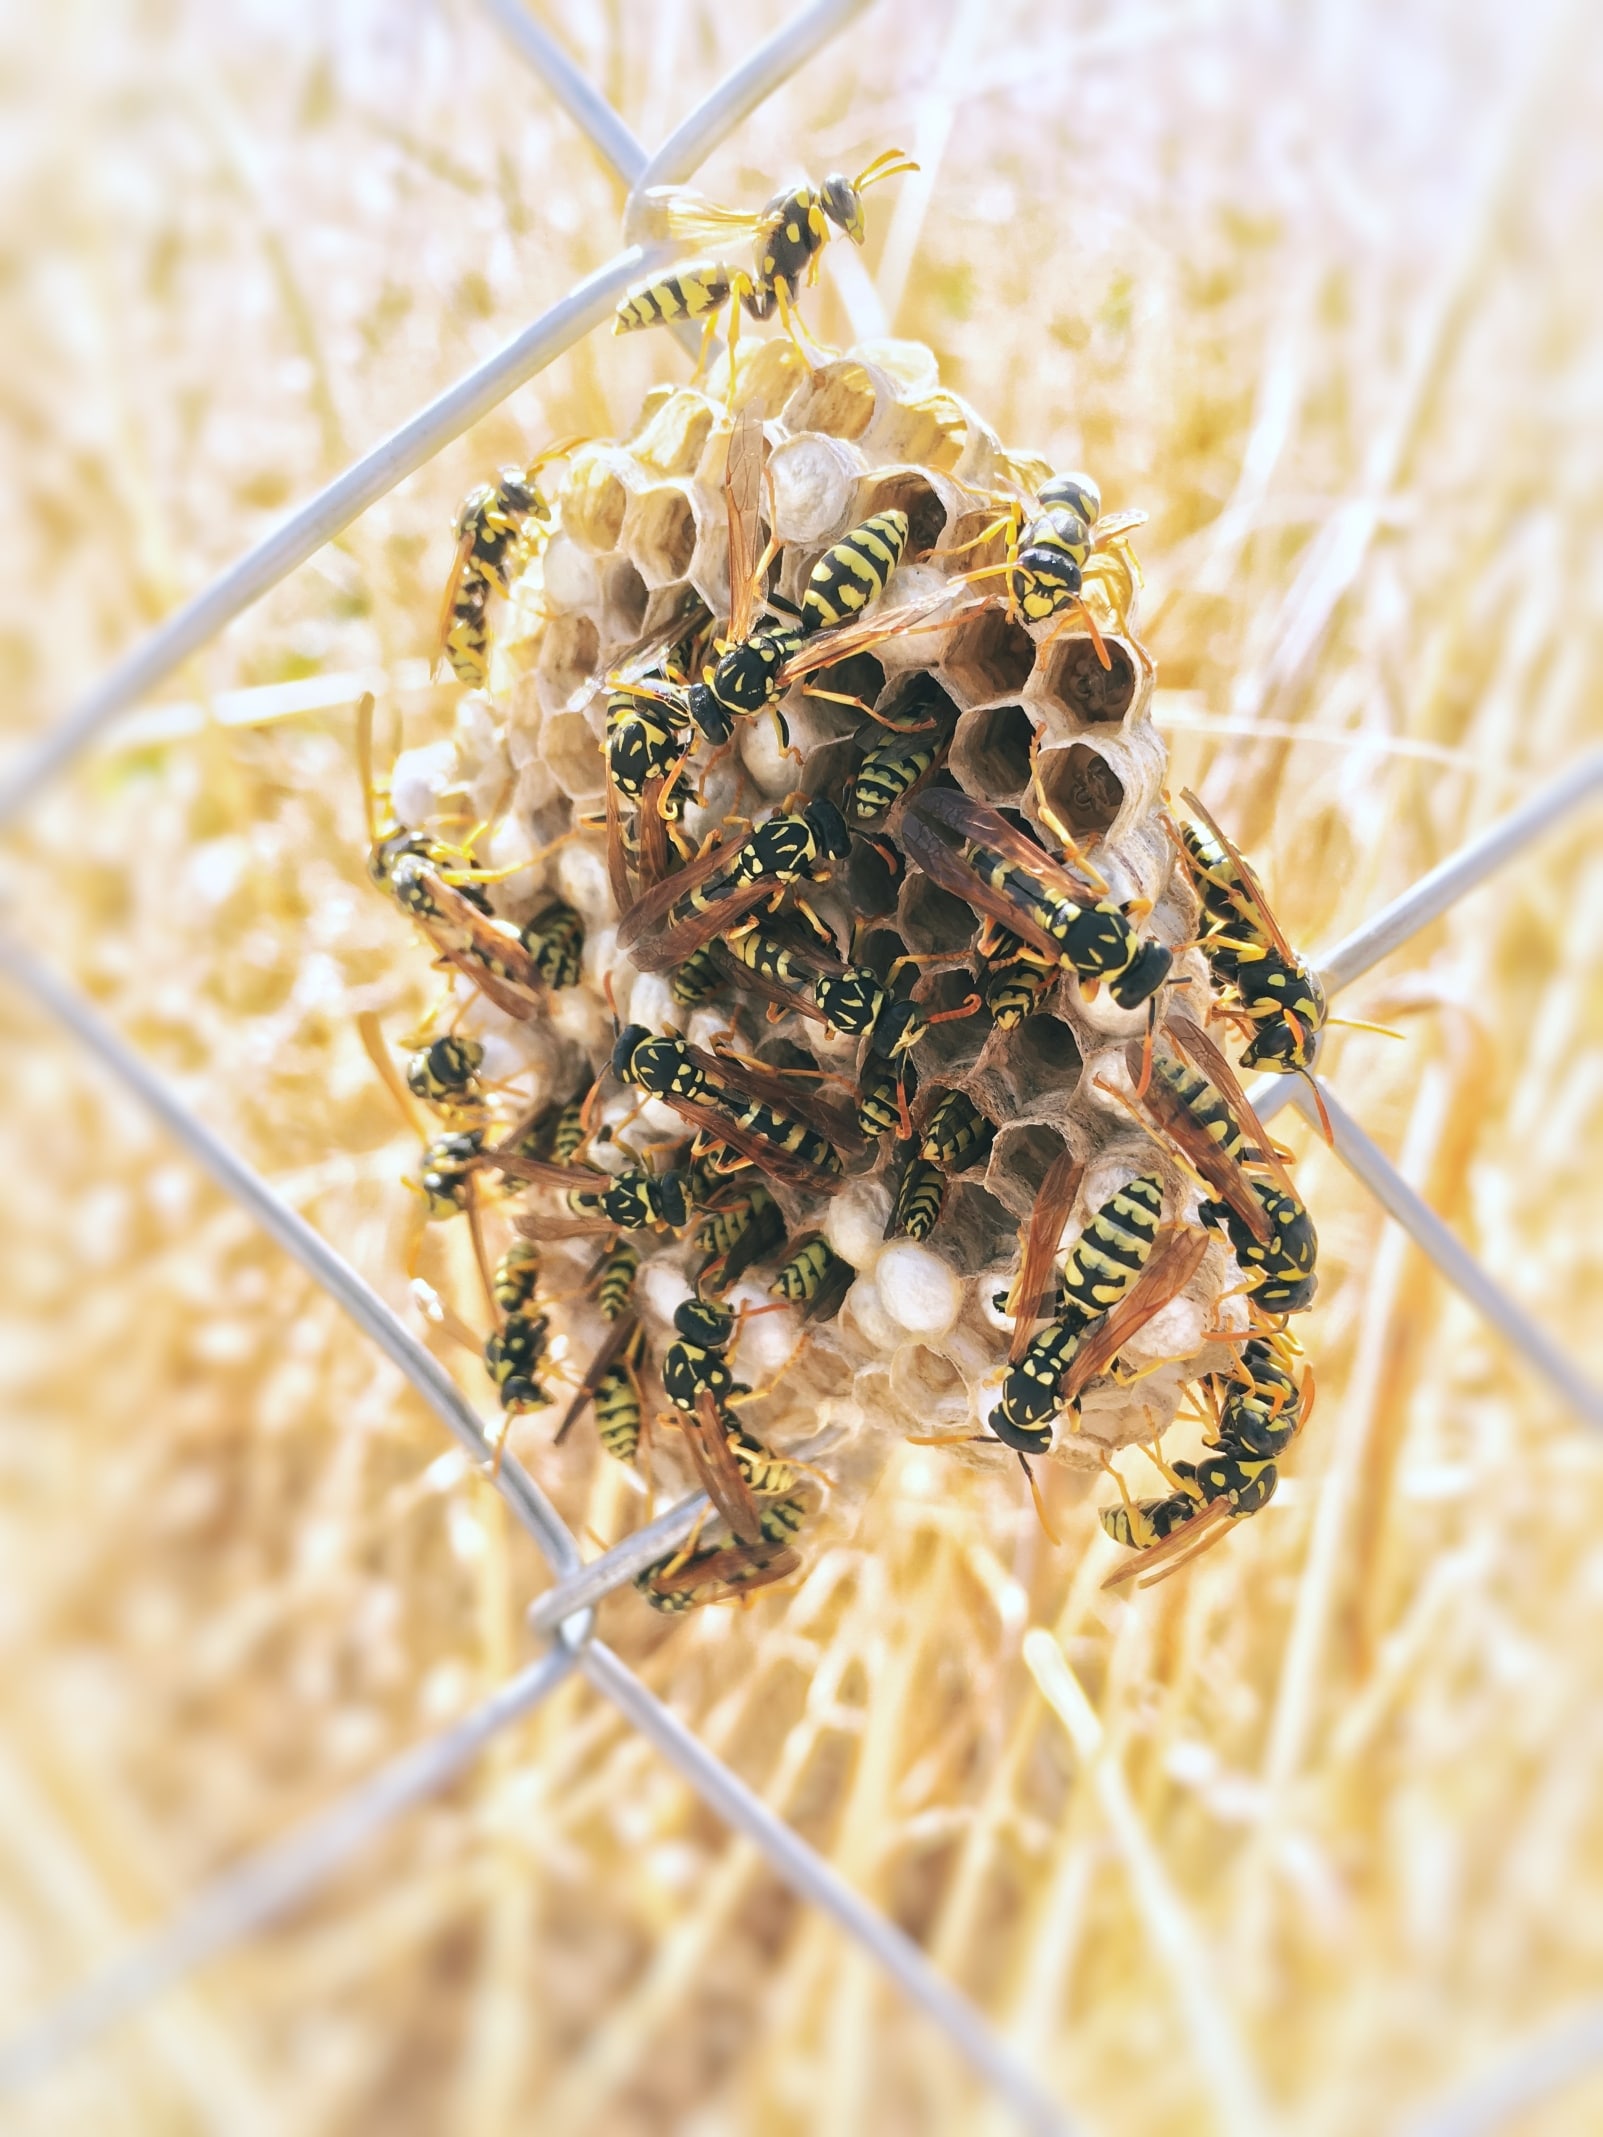 Bees nest on a metal fence